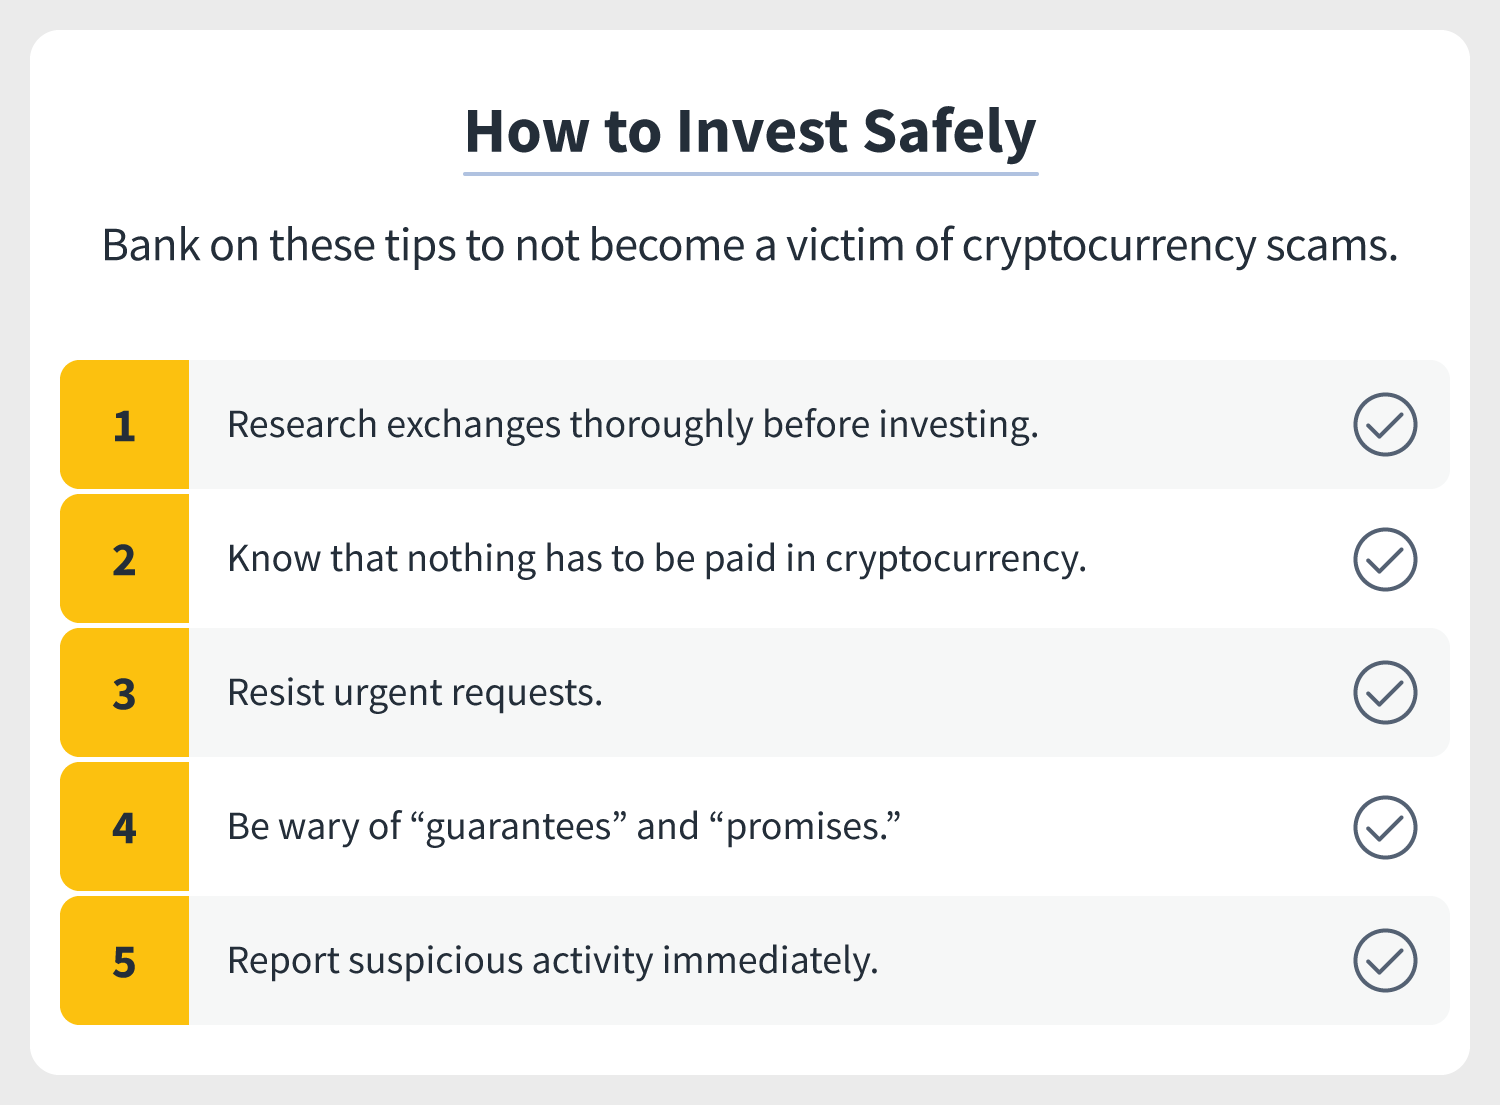 a checklist outlines five tips to invest safely in cryptocurrency and not become a cryptocurrency scam victim